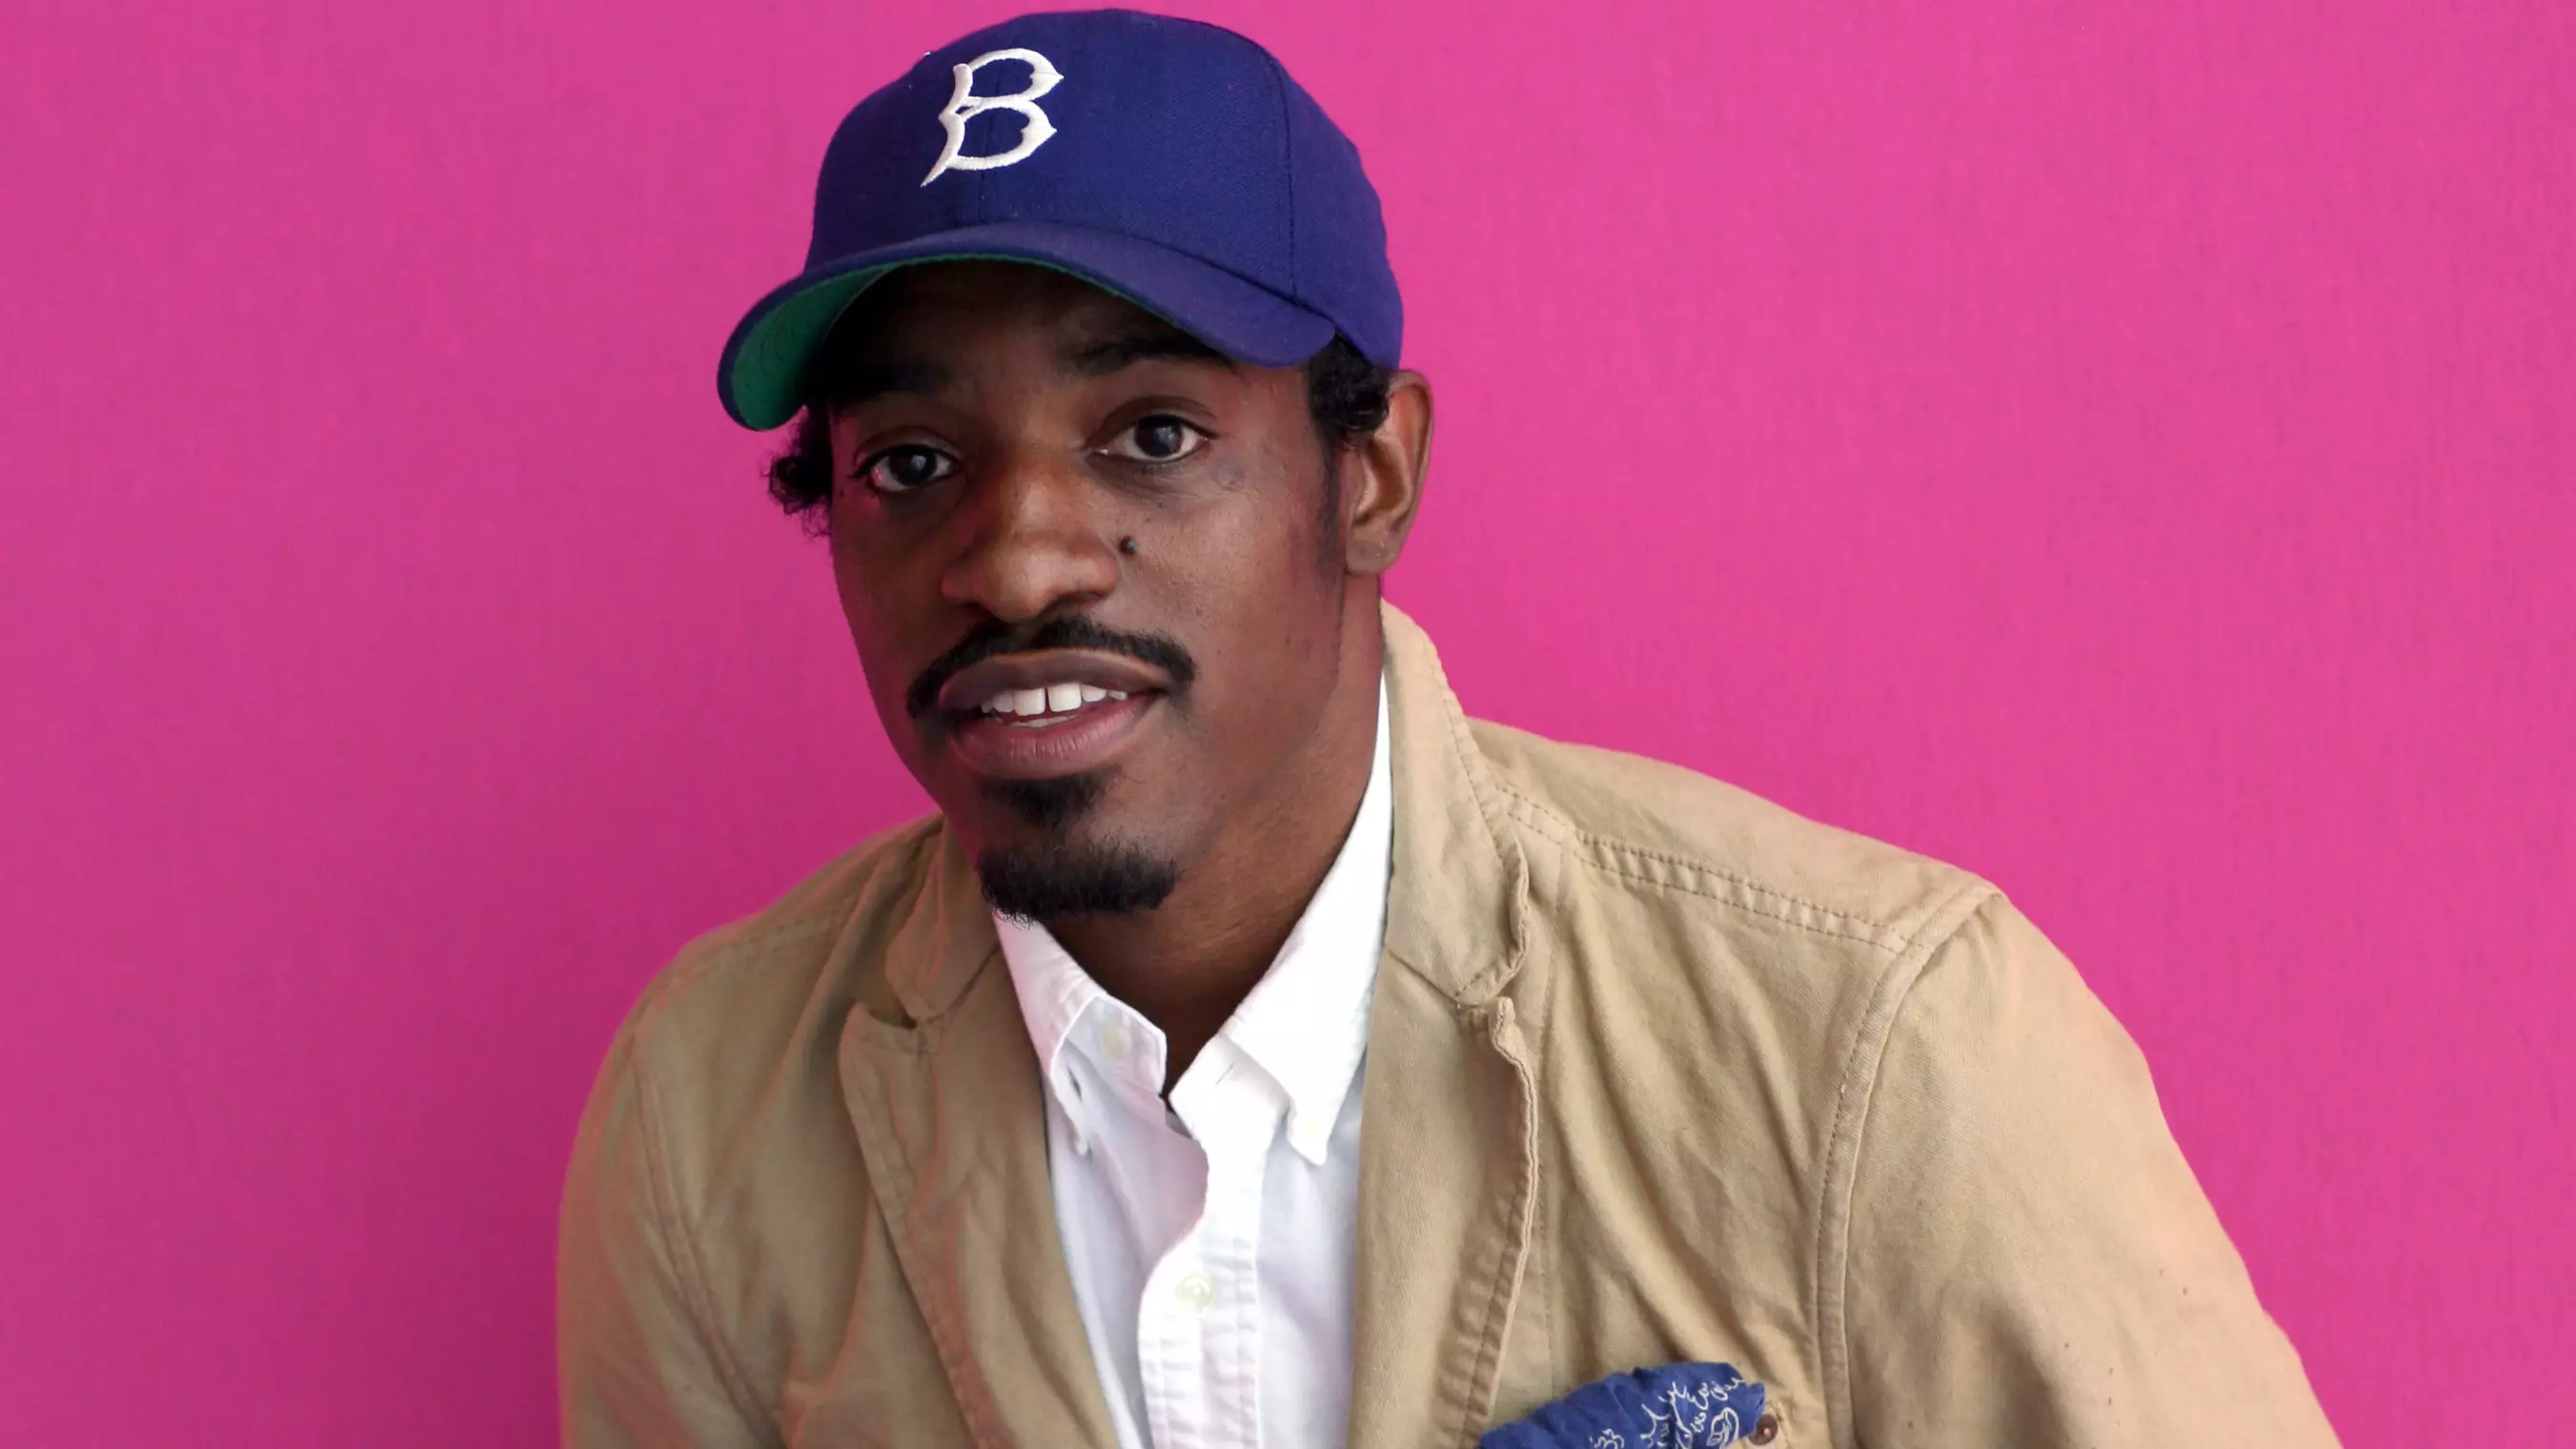 Fan Randomly Bumps Into André 3000 While Wearing T-Shirt With Him On It